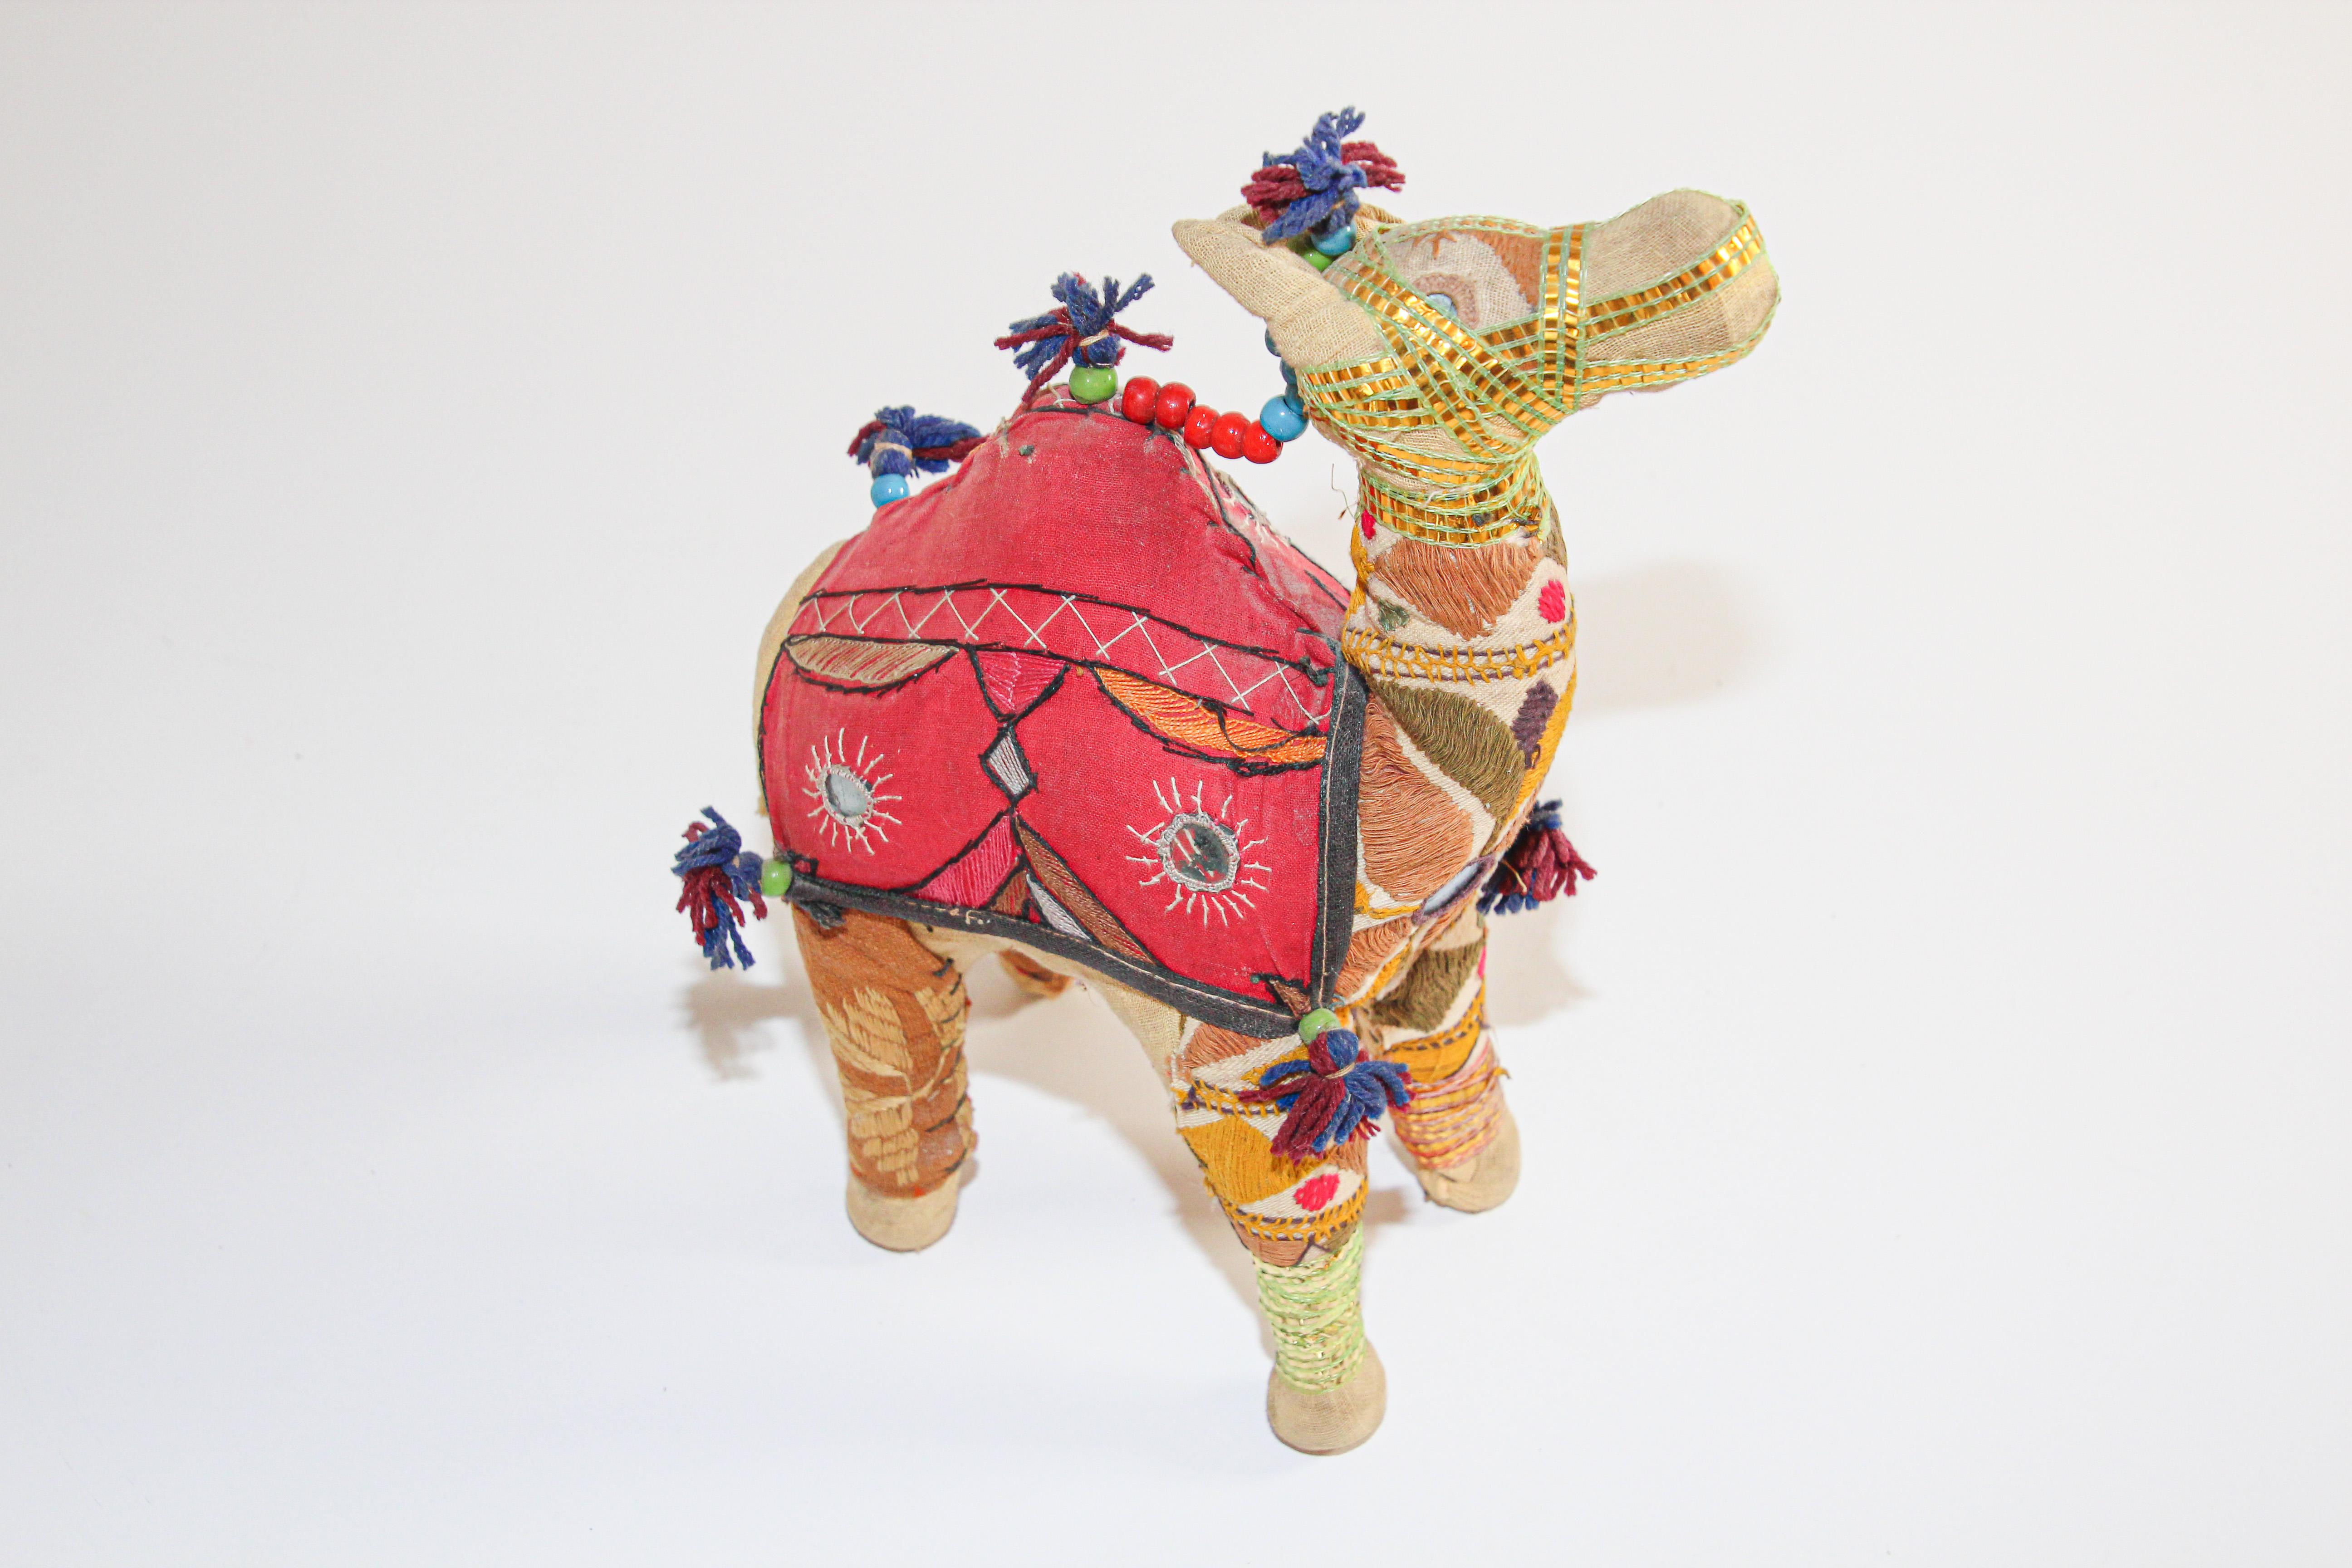 Indian Handcrafted Vintage Stuffed Cotton Embroidered Camel Toy, India, 1950